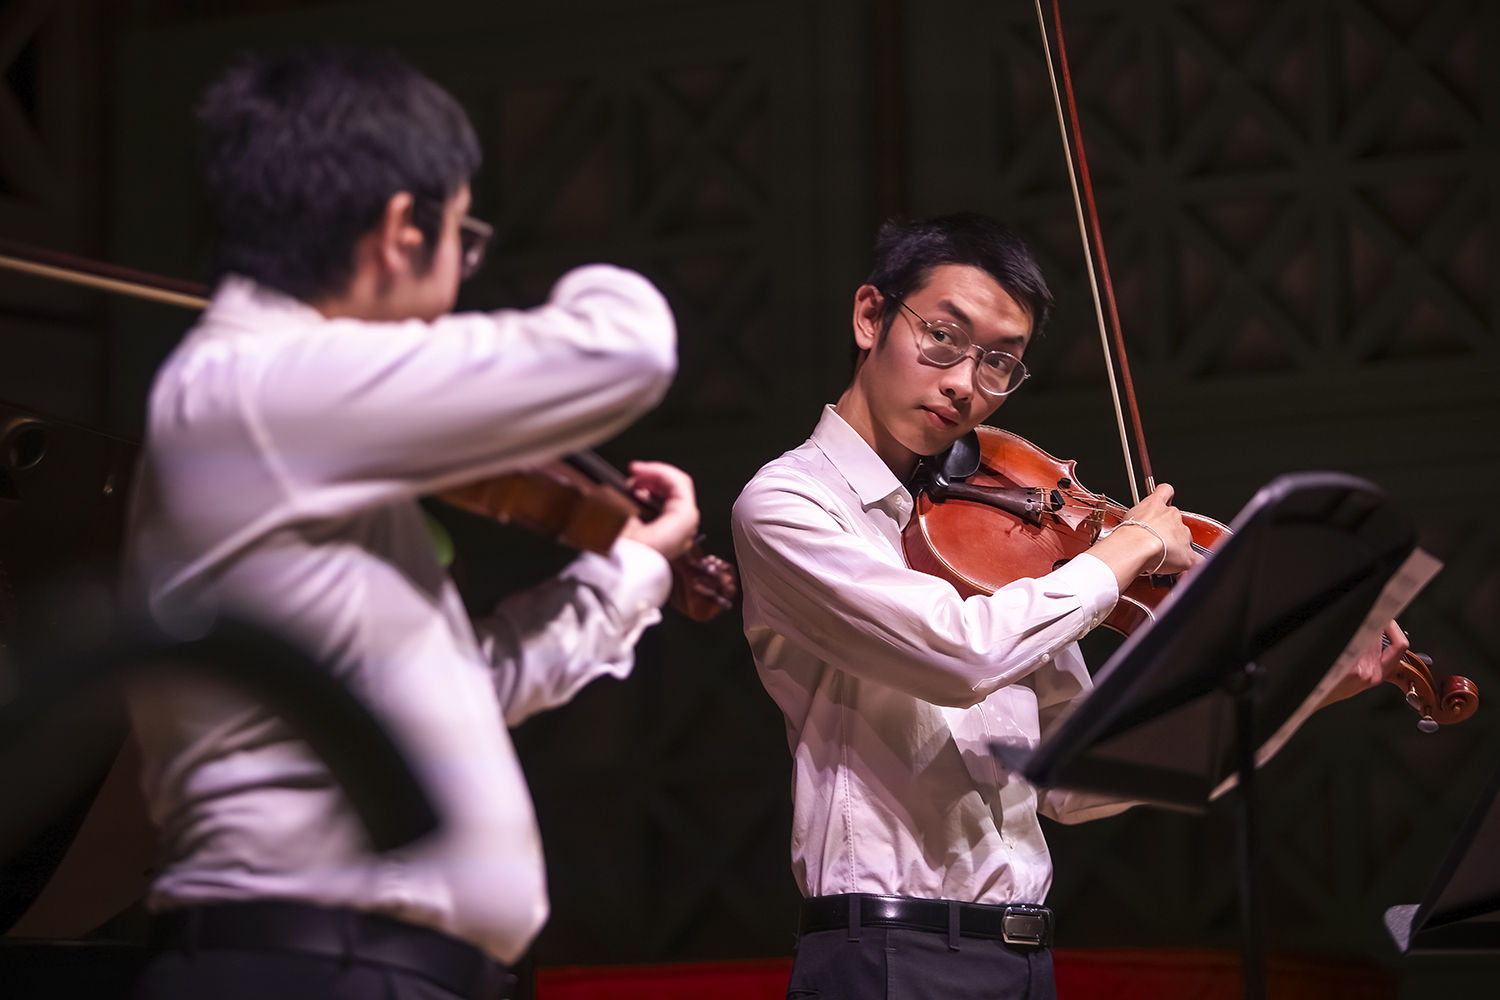 Two violinists wearing white shirts performing on stage